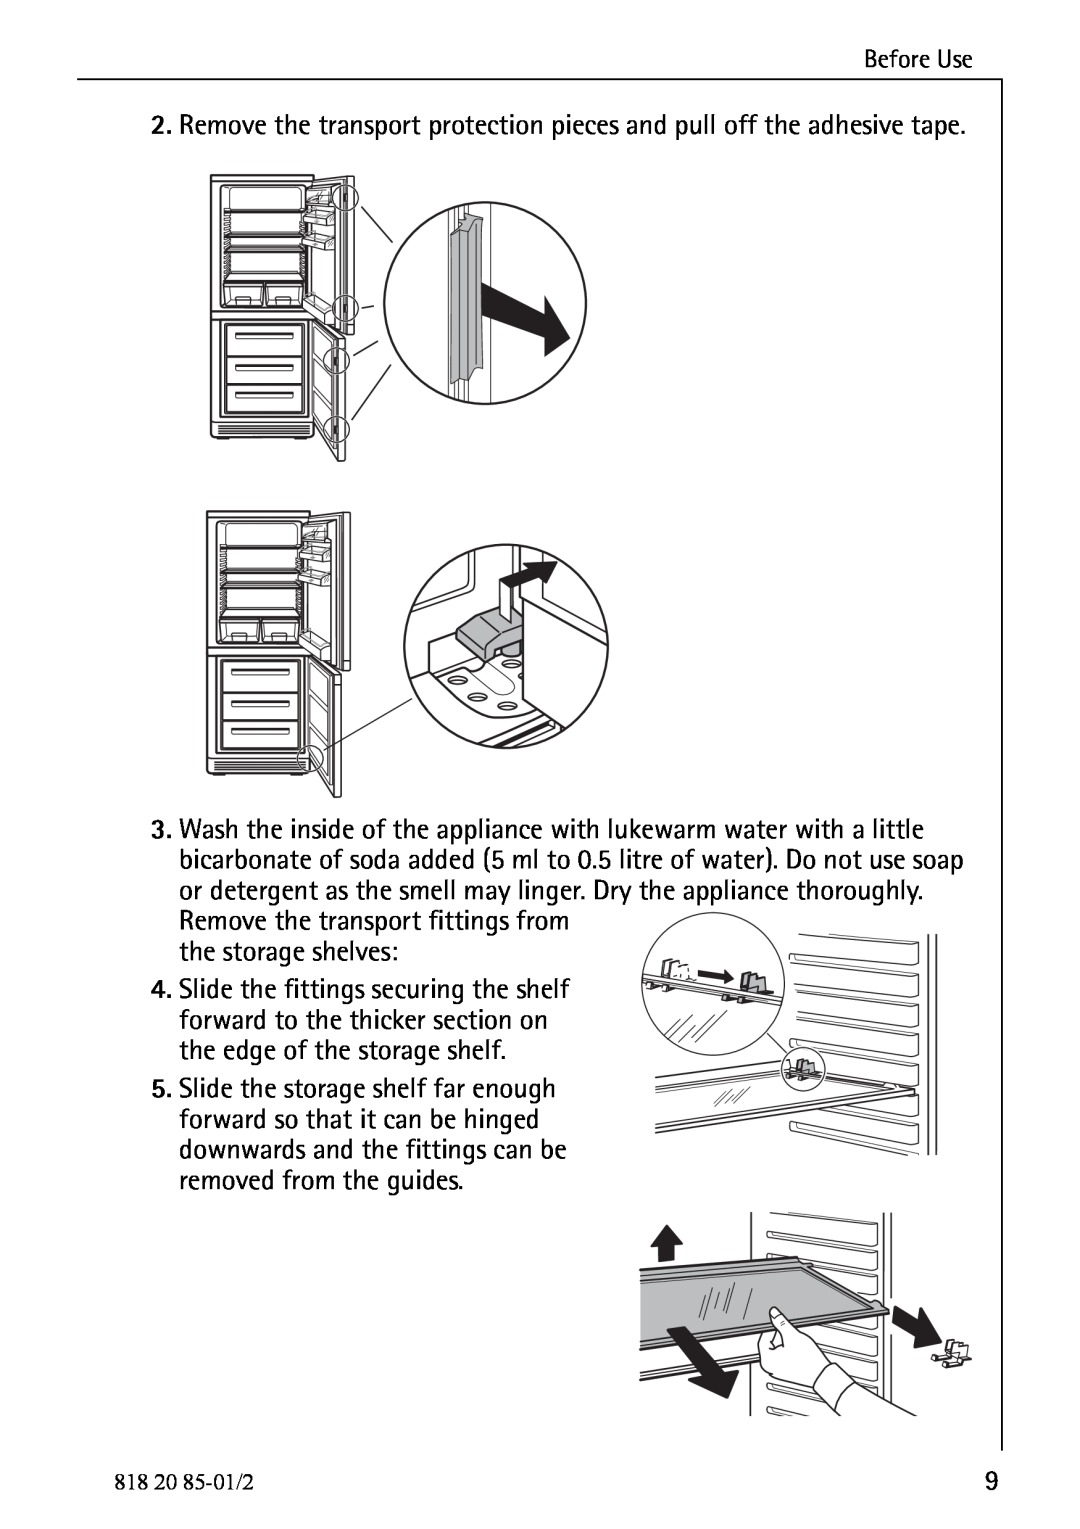 Electrolux 818 20 85 operating instructions Remove the transport fittings from the storage shelves 